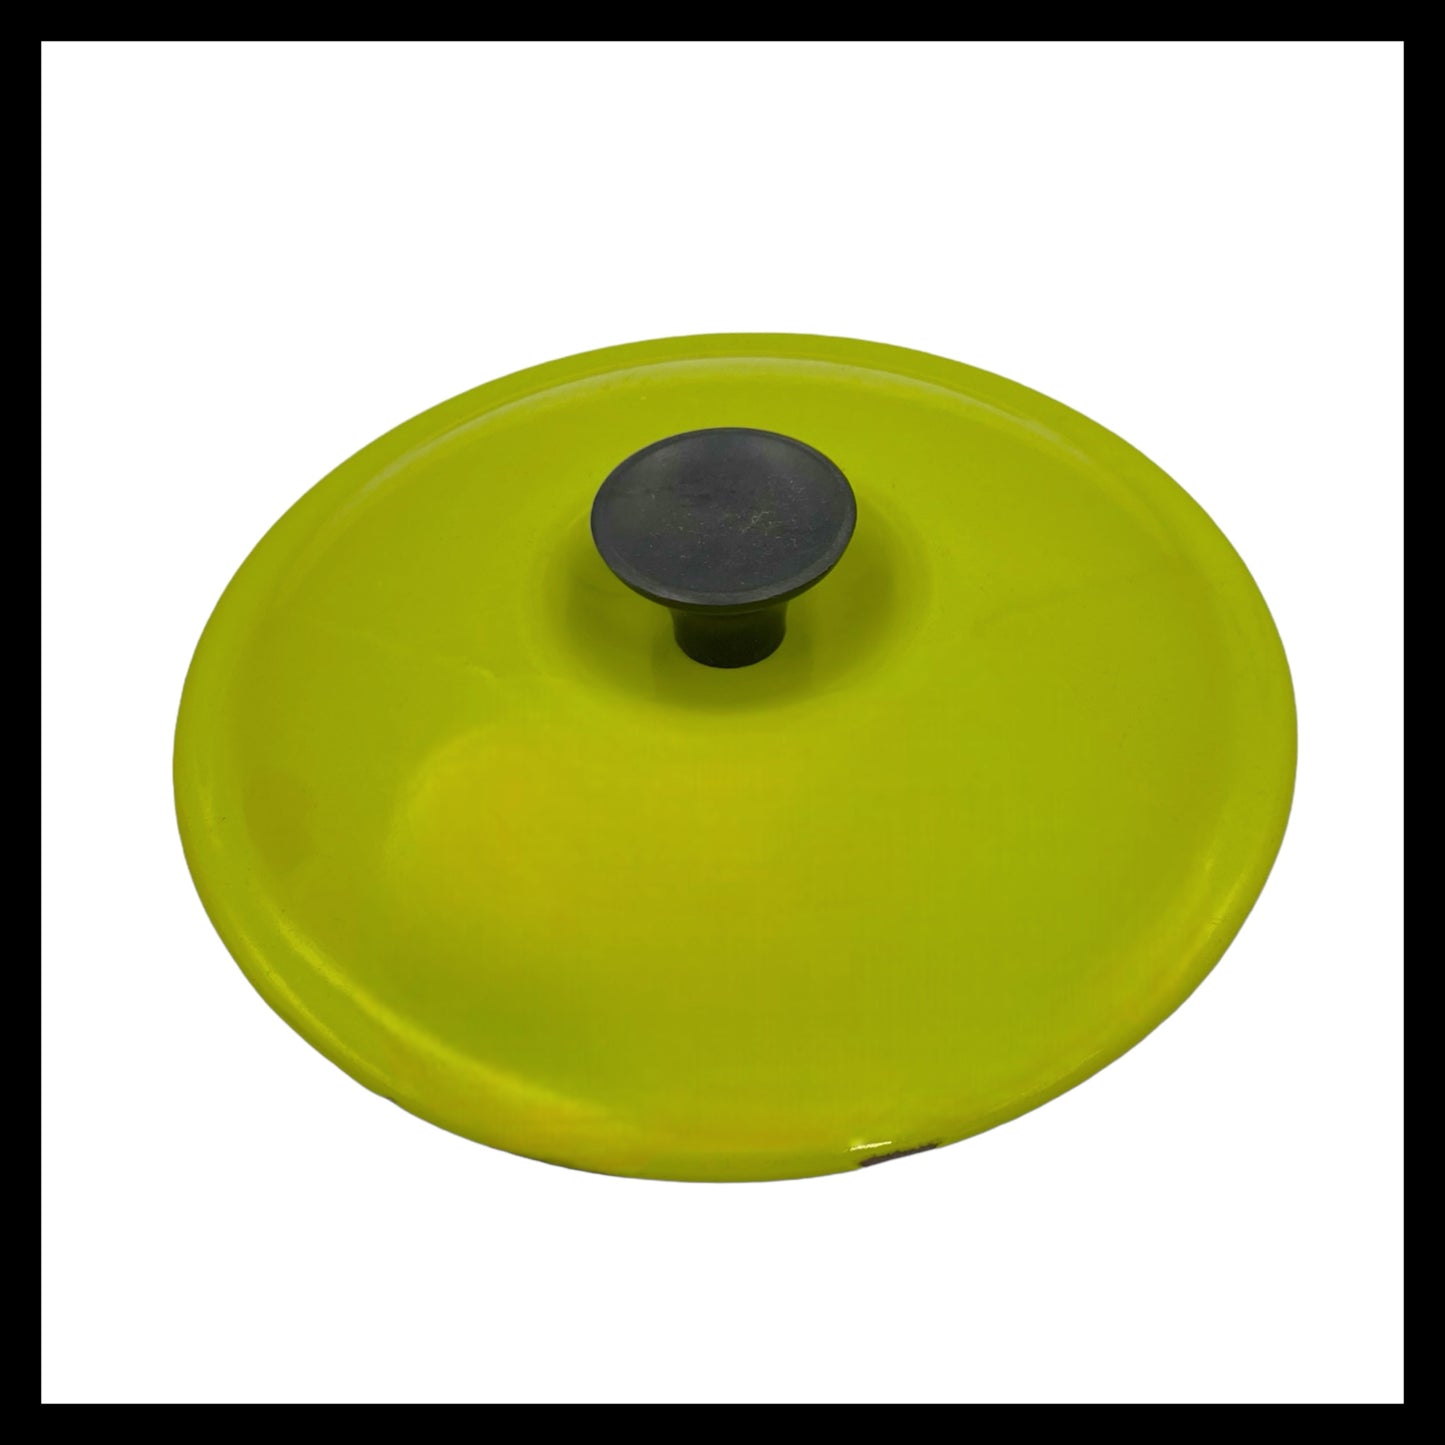 Vintage Le Creuset replacement saucepan lid in lime green for sale by All Things French Store